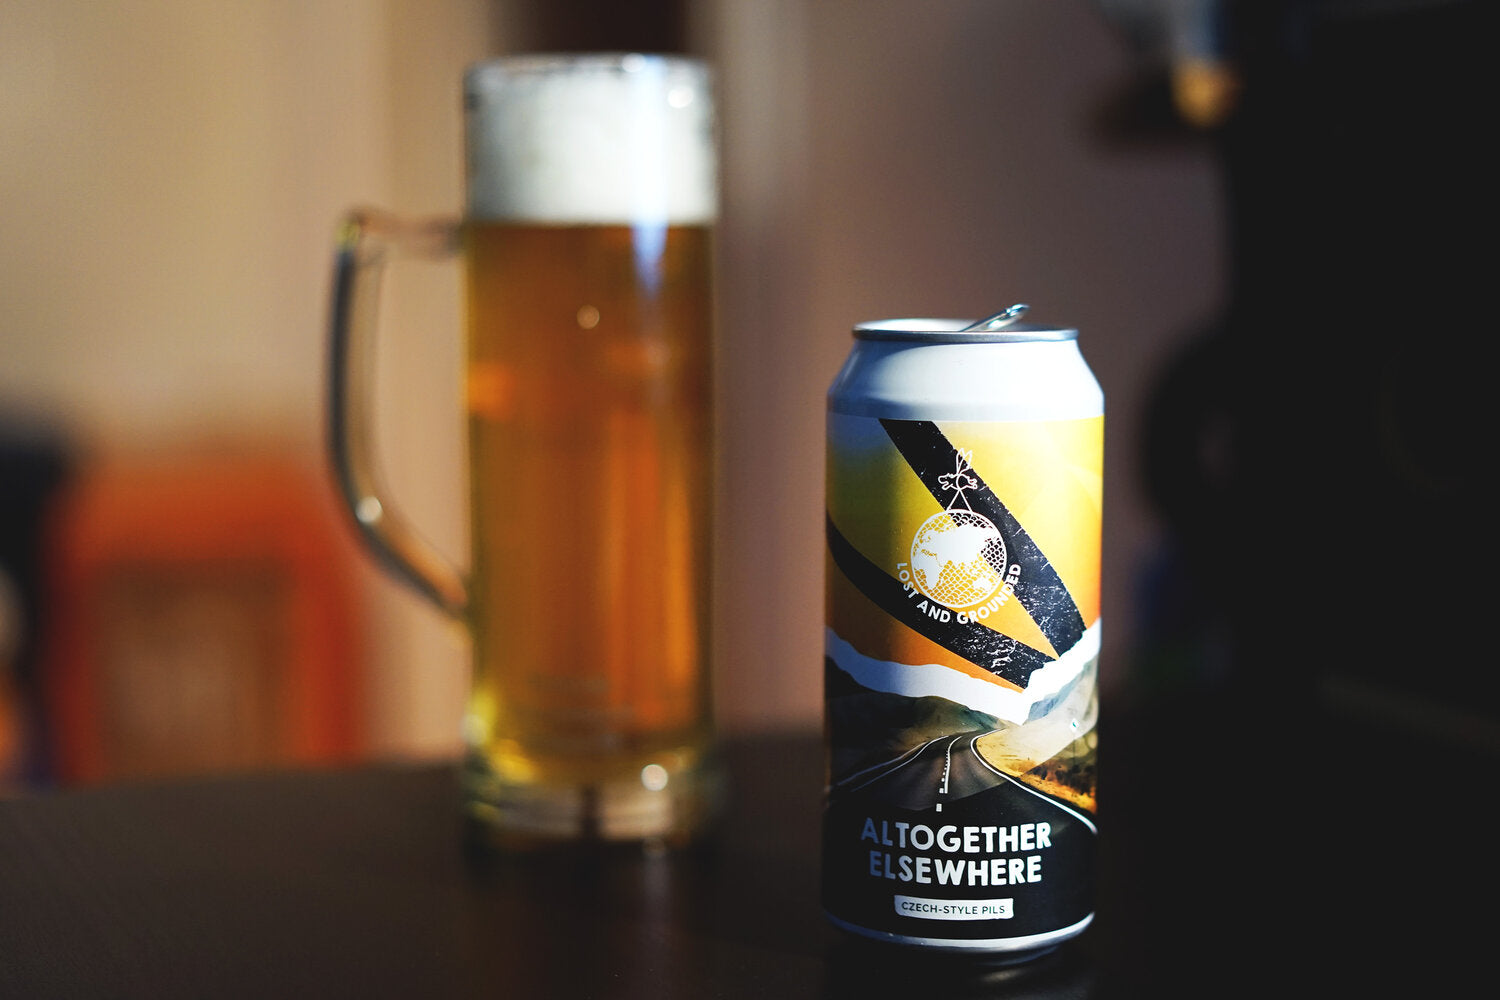 Fundamentals #68 — Lost and Grounded Altogether Elsewhere Czech-Style Pils